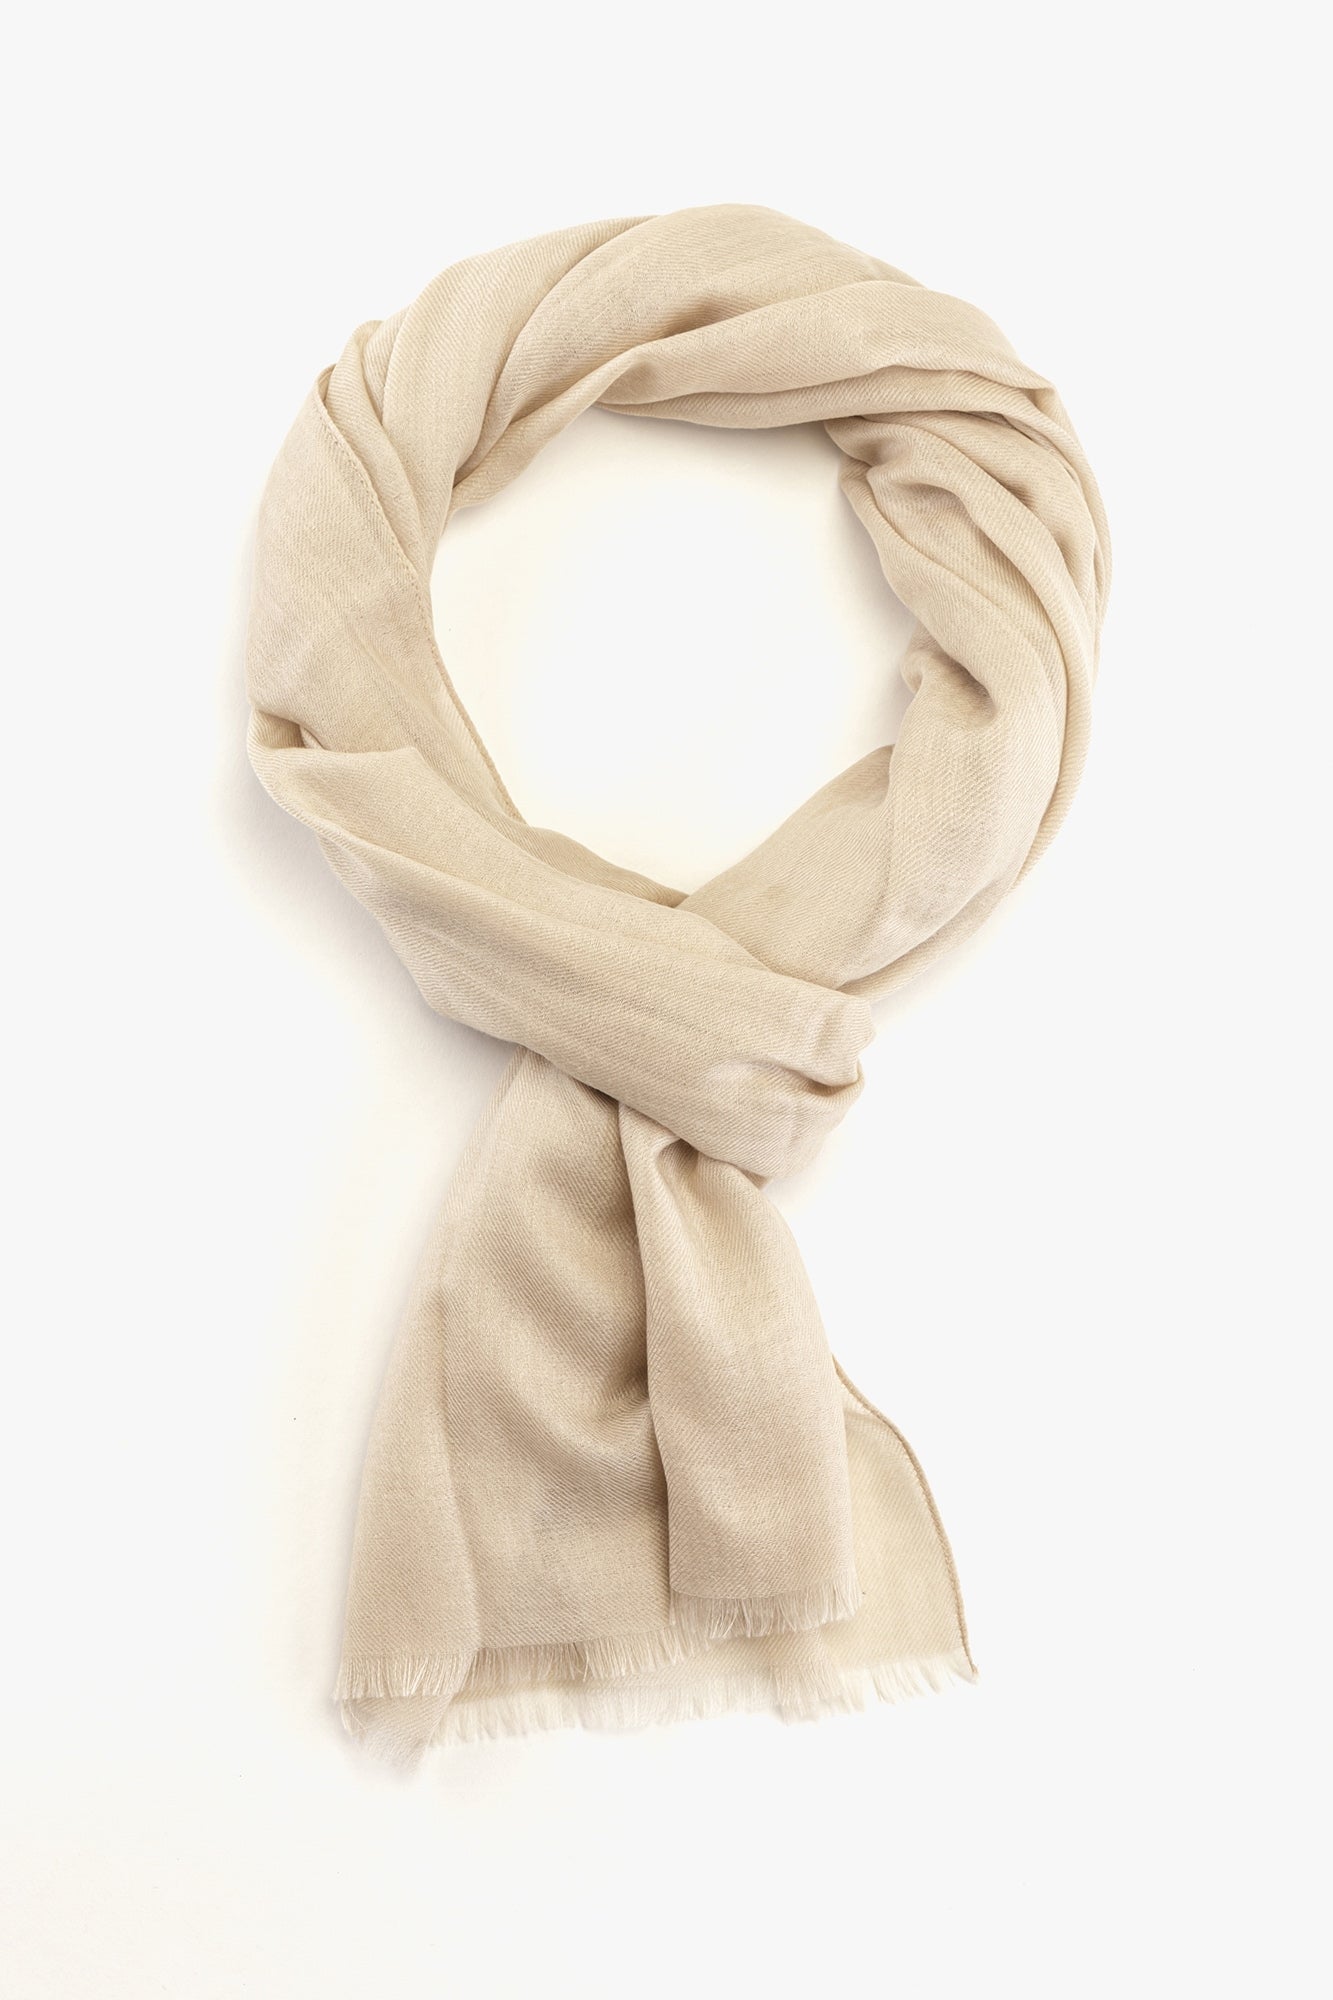 CHIC Stola in Cashmere Panna - Piacenza Cashmere